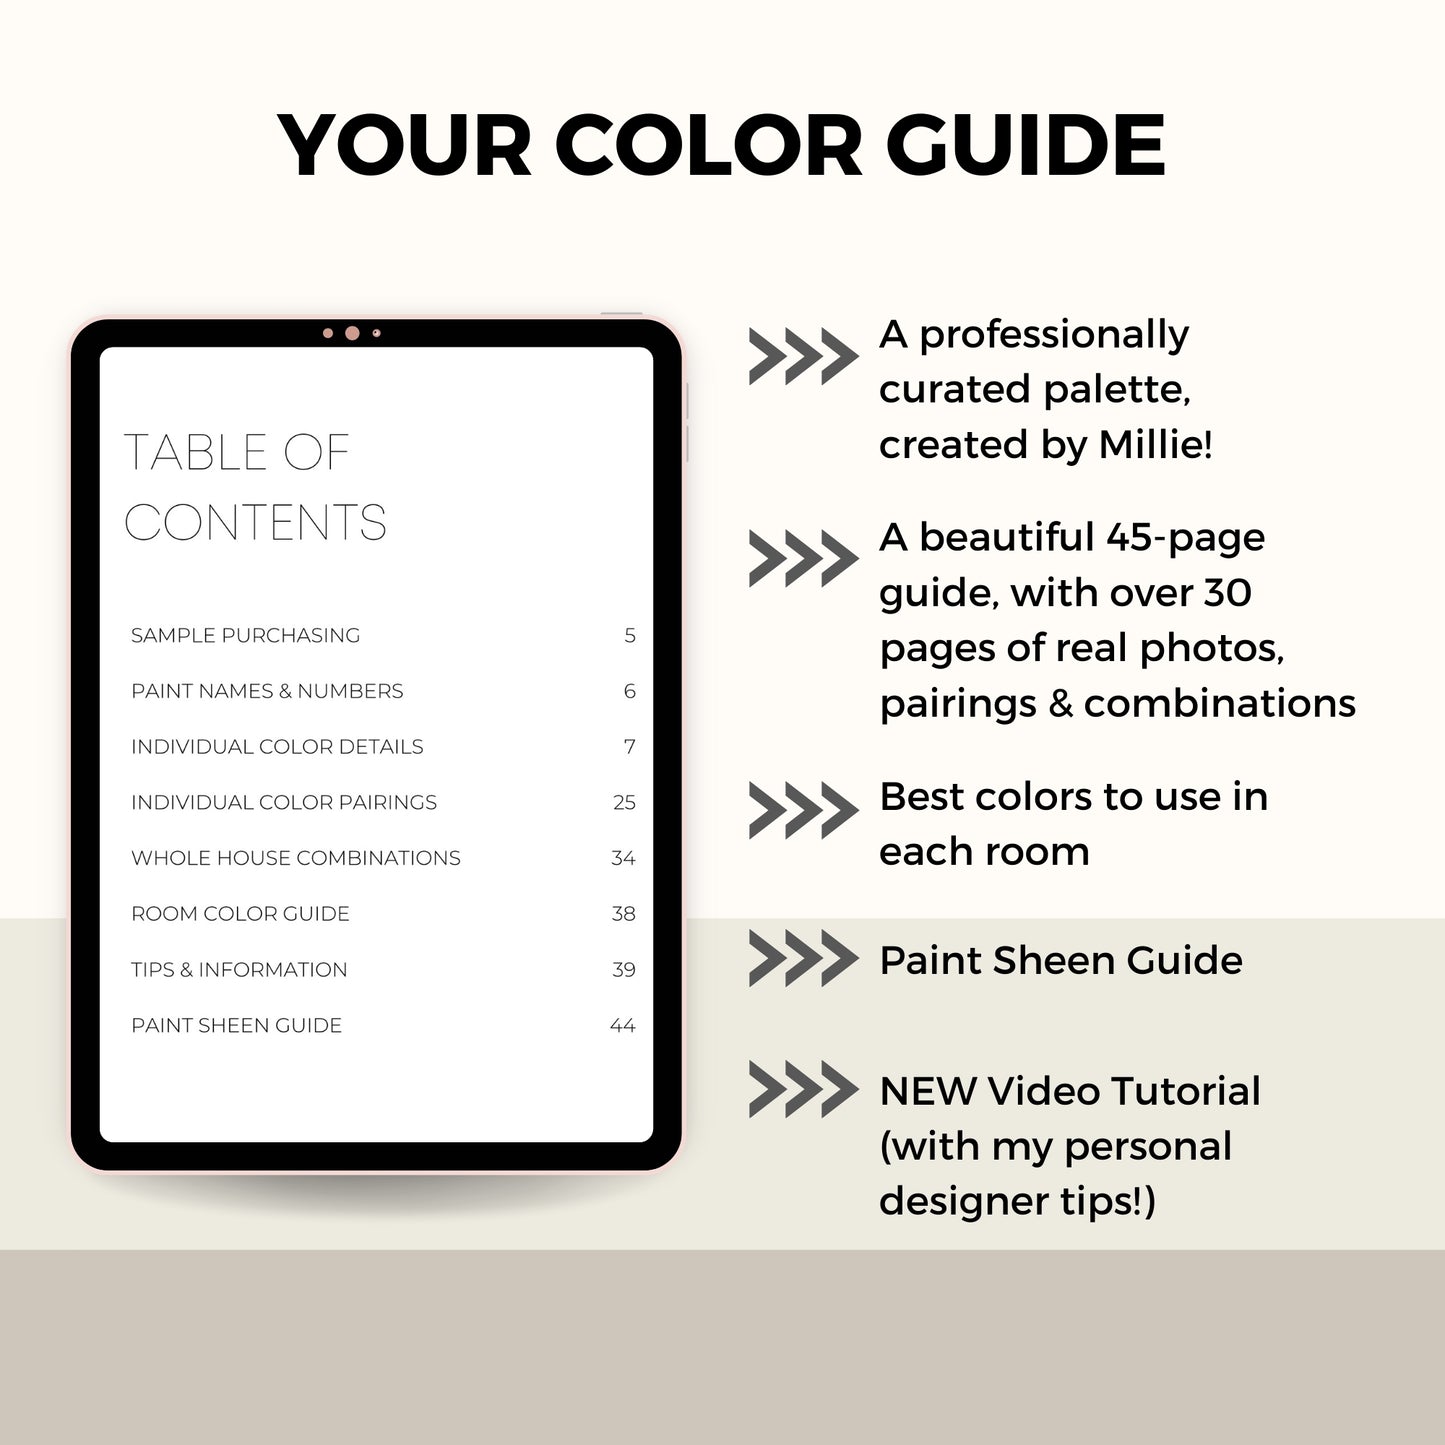 Warm Grays Benjamin Moore Paint Palette - Modern Neutral Interior Paint Colors for Home - Coordinating Interior Design Color Palette, Benjamin Moore Collingwood